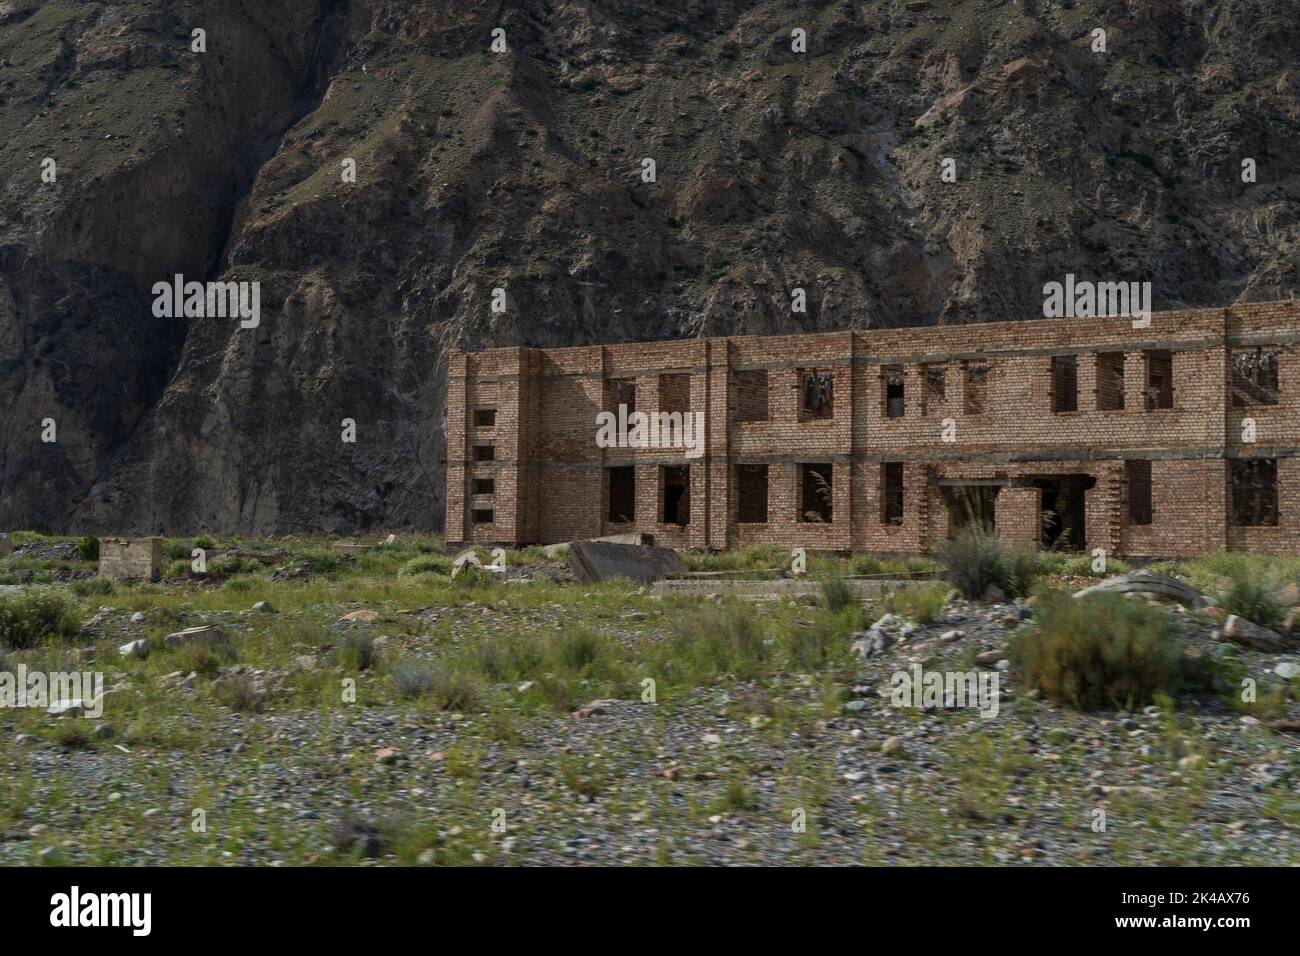 Abandoned and unfinished residential Soviet apartment buildings in Enilchek mining town, Kyrgyzstan Stock Photo